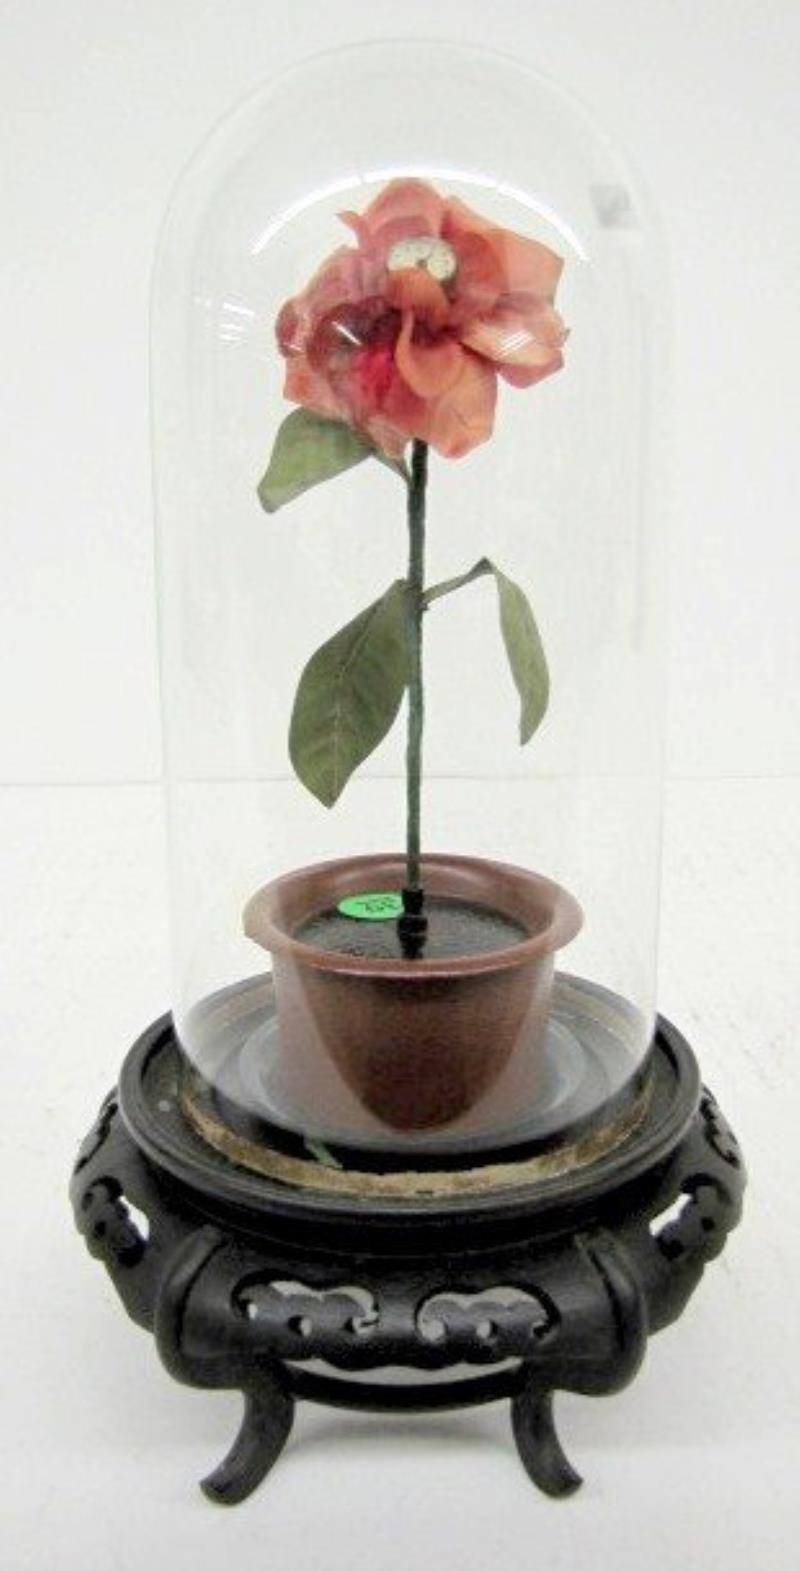 Red Rose Potted Plant Novelty Clock